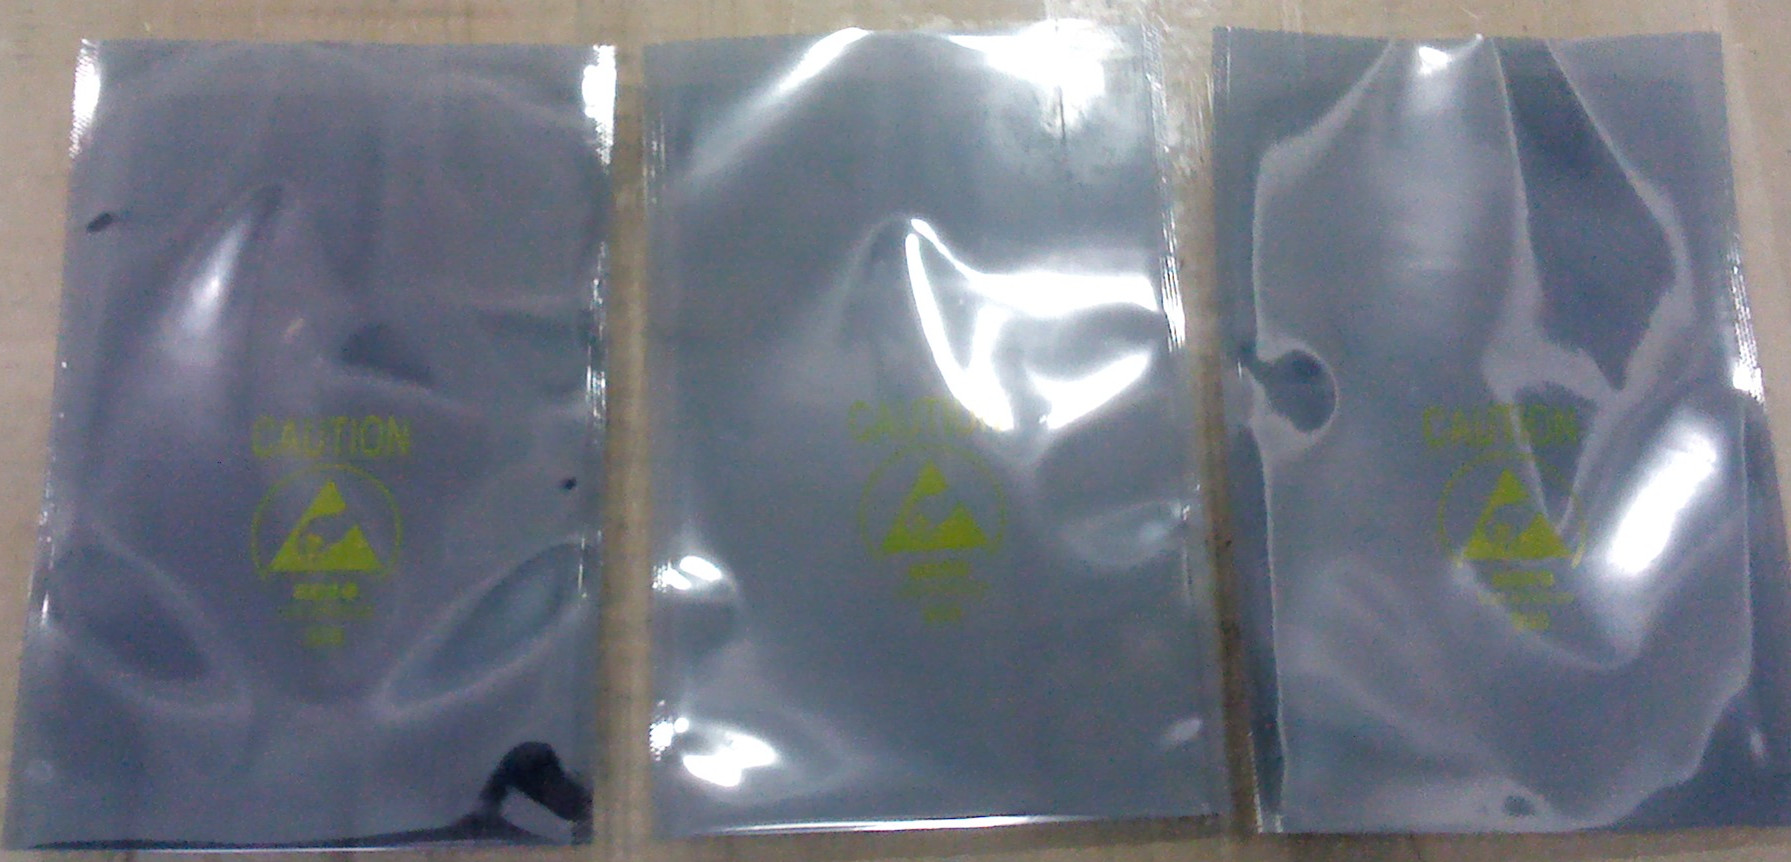 Antistatic Shielding Bags 12*16cm ESD barrier bags for electronic parts and fittings